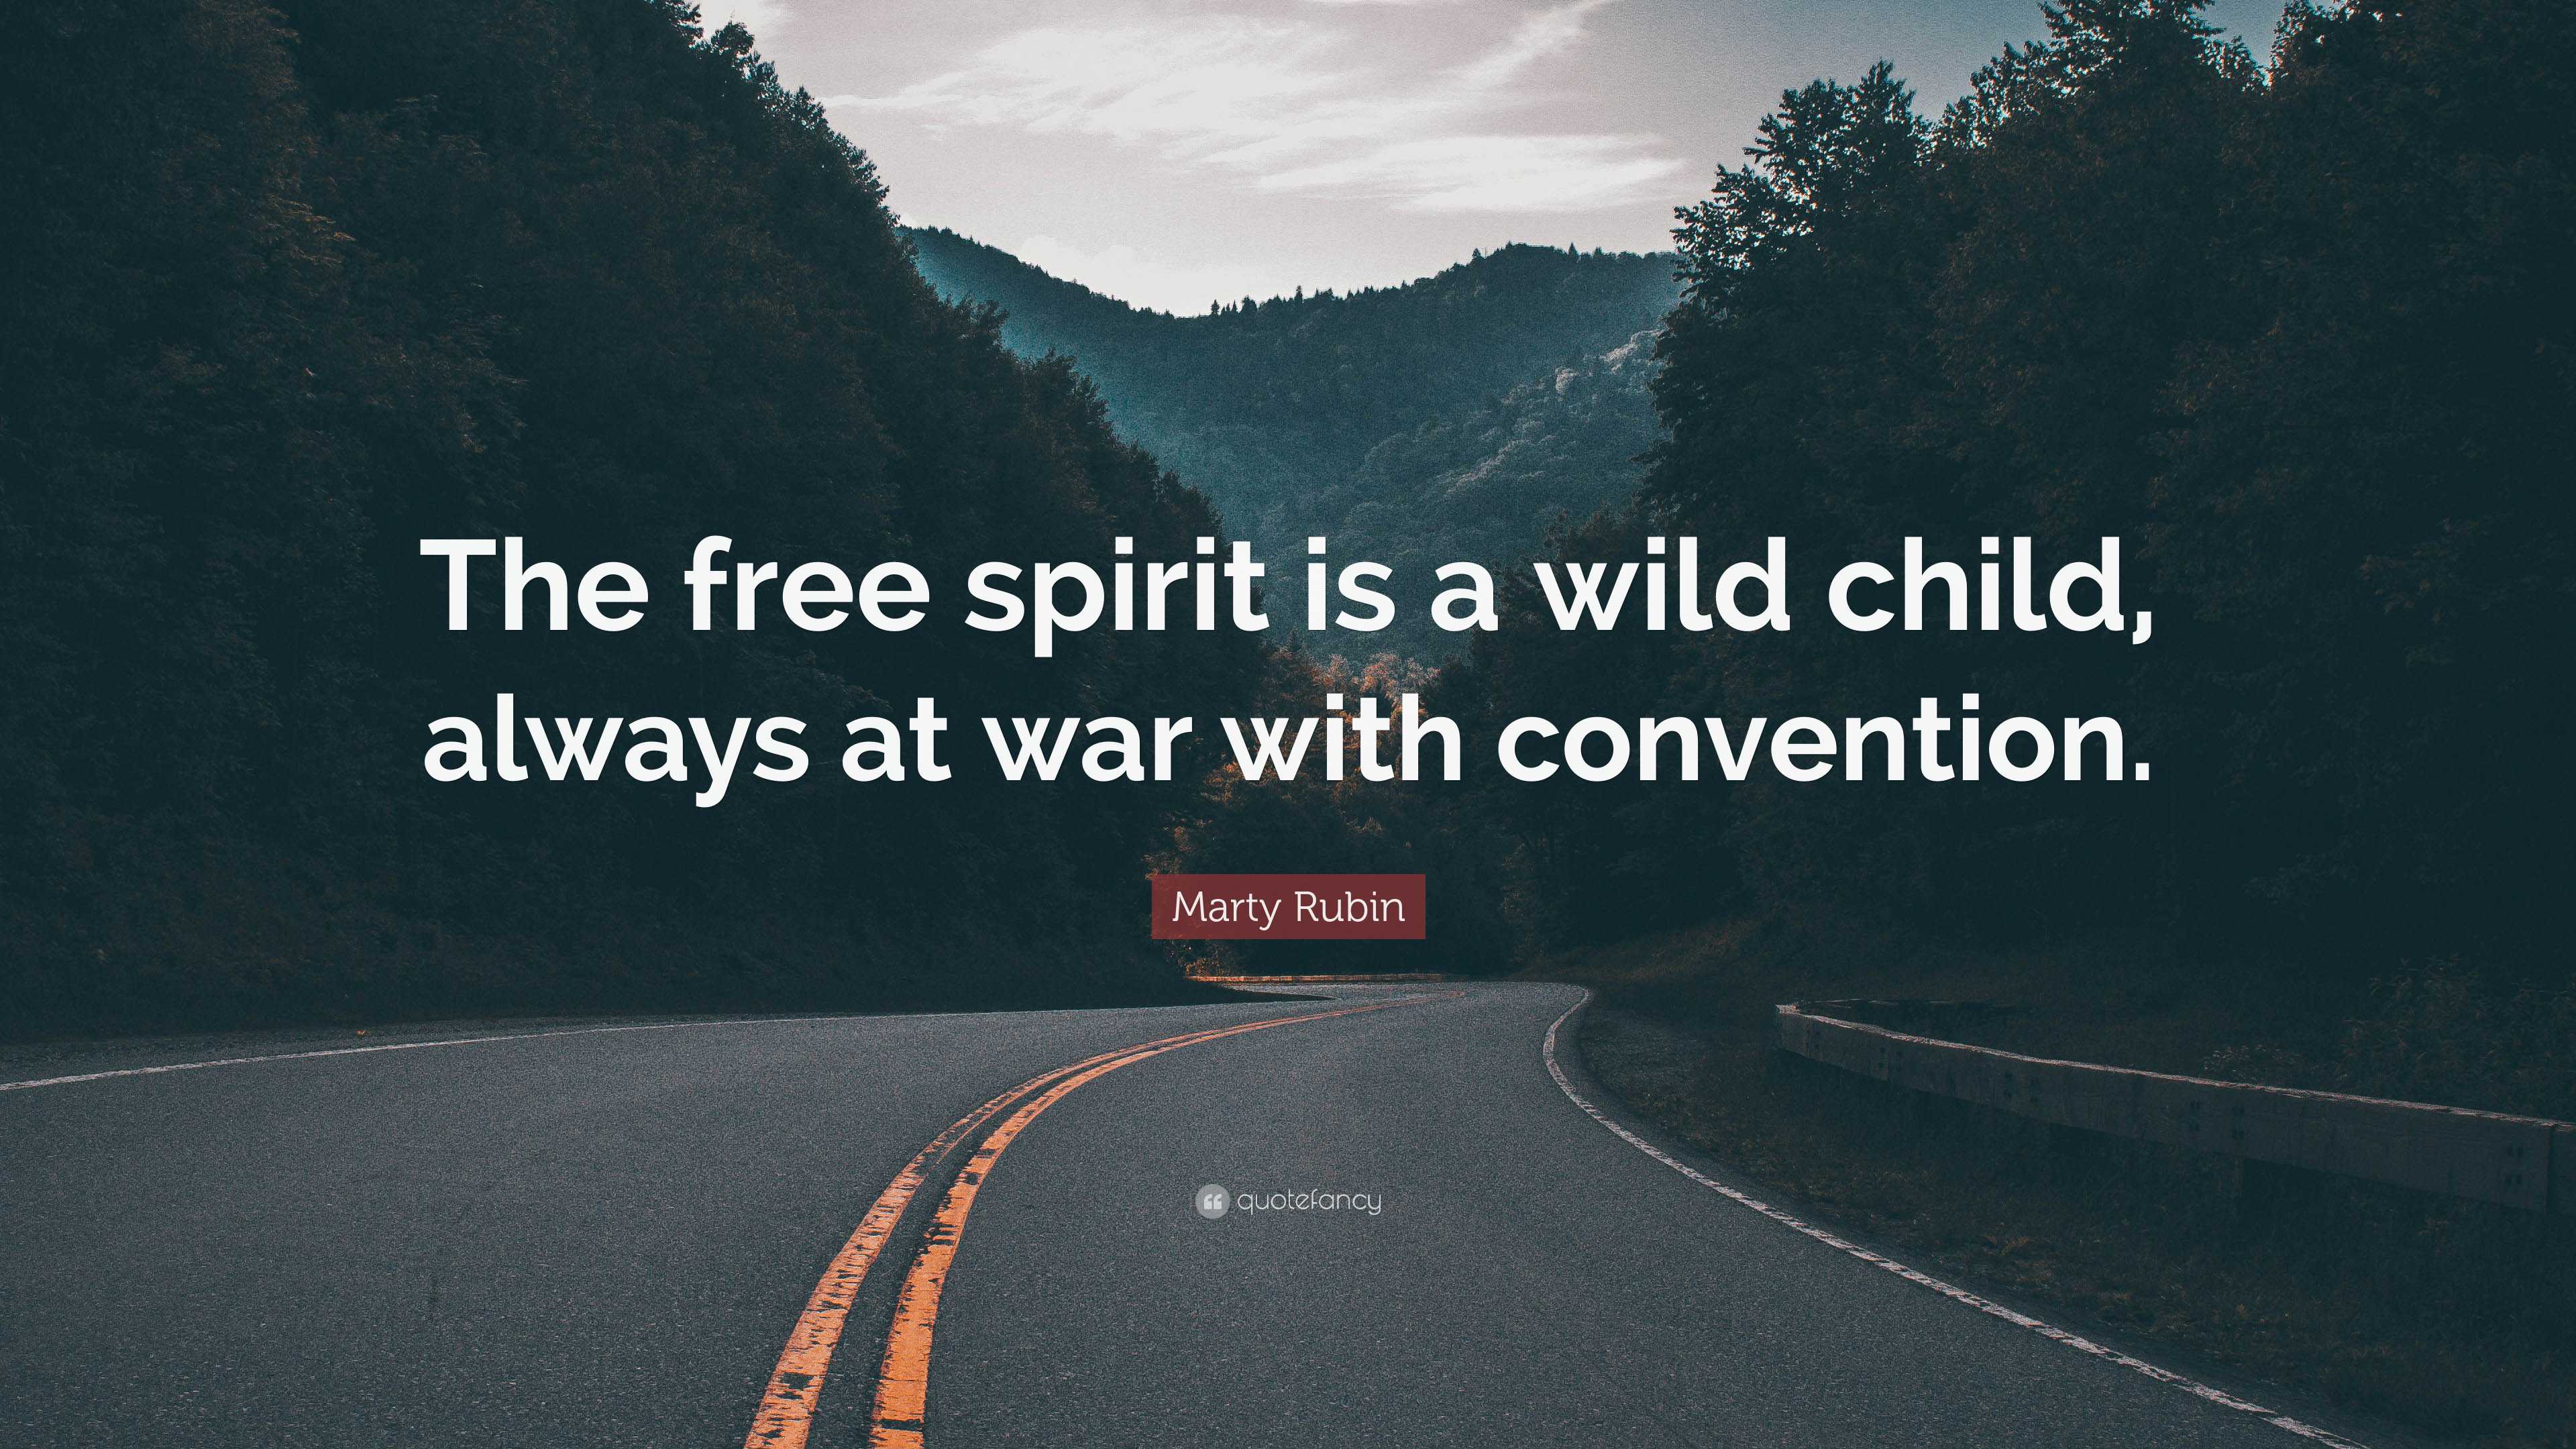 Marty Rubin Quote: “The free spirit is a wild child, always at war with  convention.”